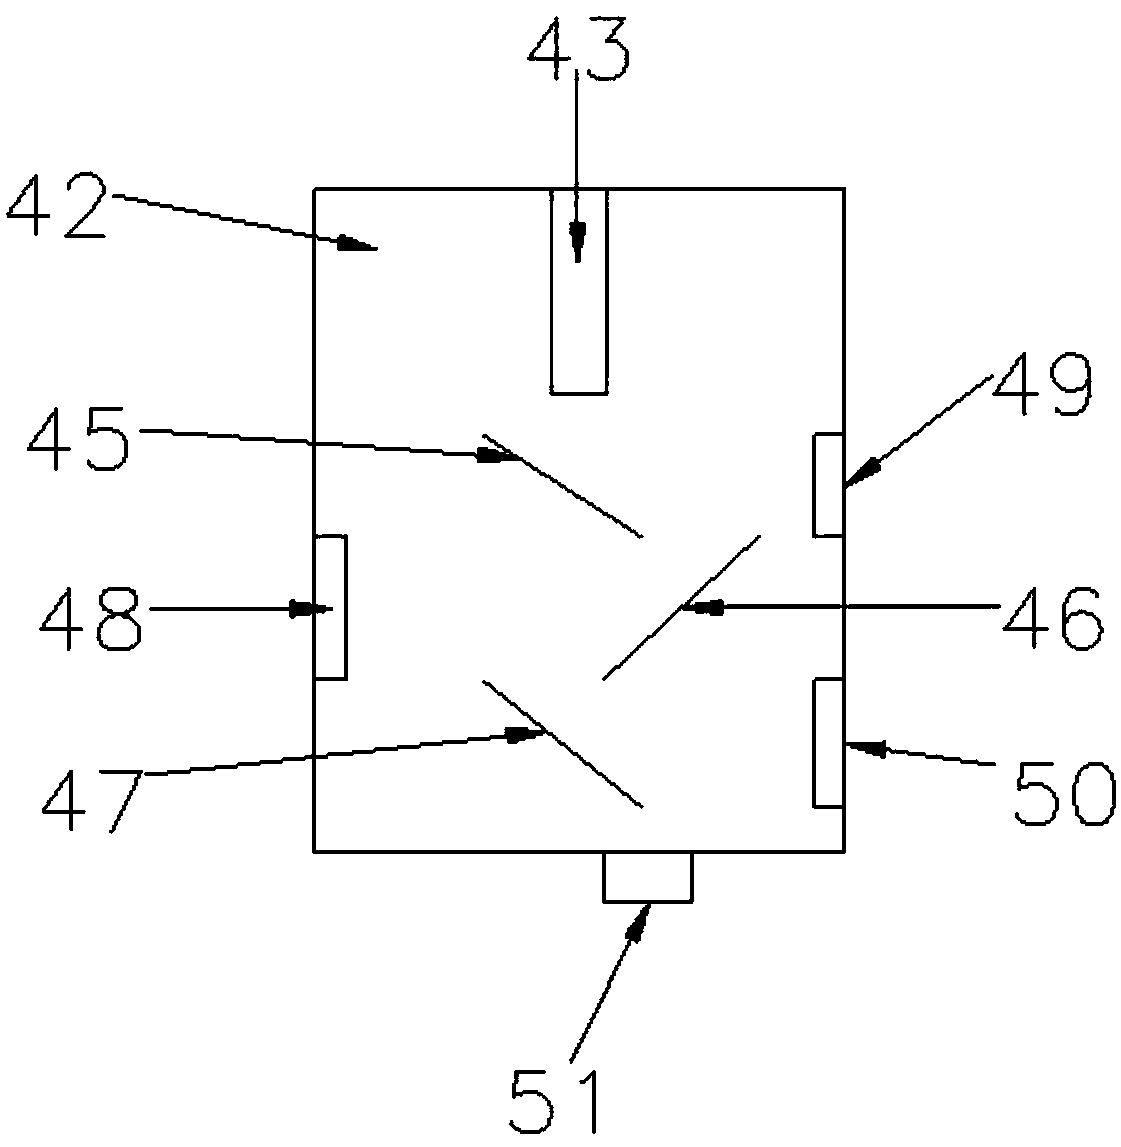 Air bacteria sampling, culture and detection integrated device